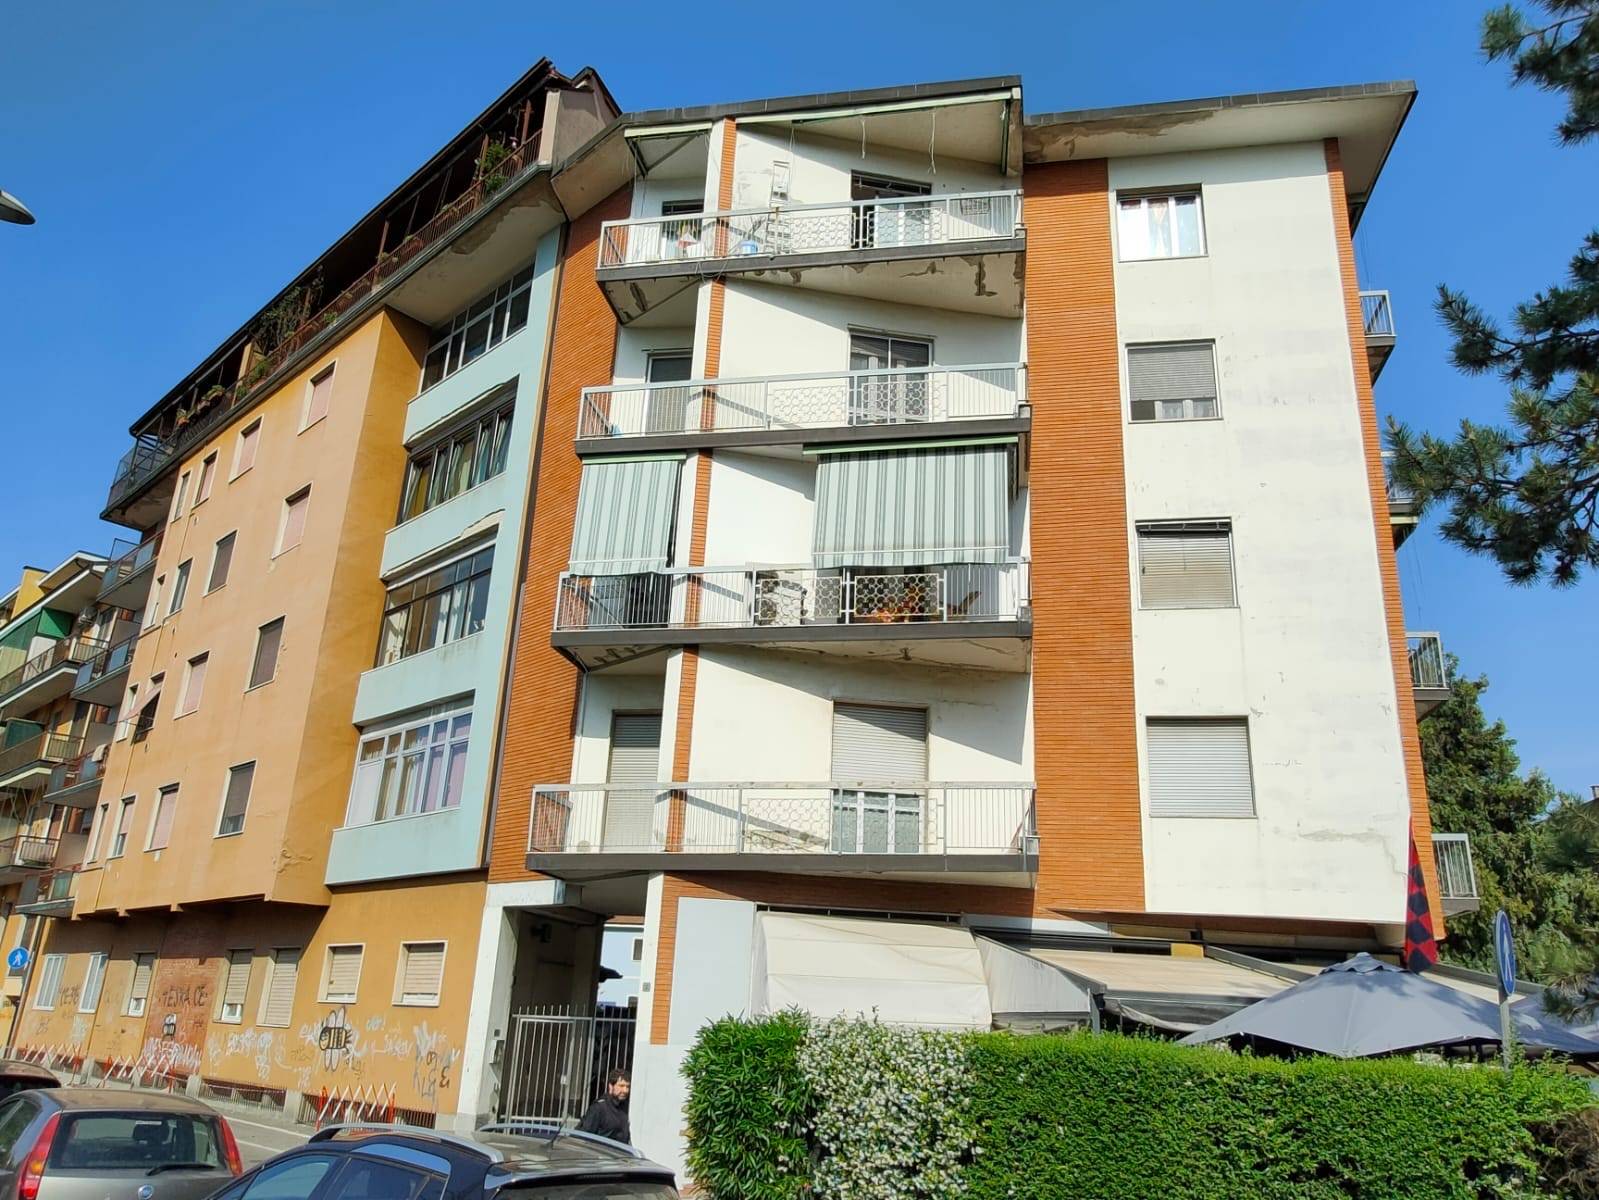 SEMICENTRO, LODI, Apartment for sale of 110 Sq. mt., Habitable, Heating Individual heating system, Energetic class: G, Epi: 297,65 kwh/m2 year, 